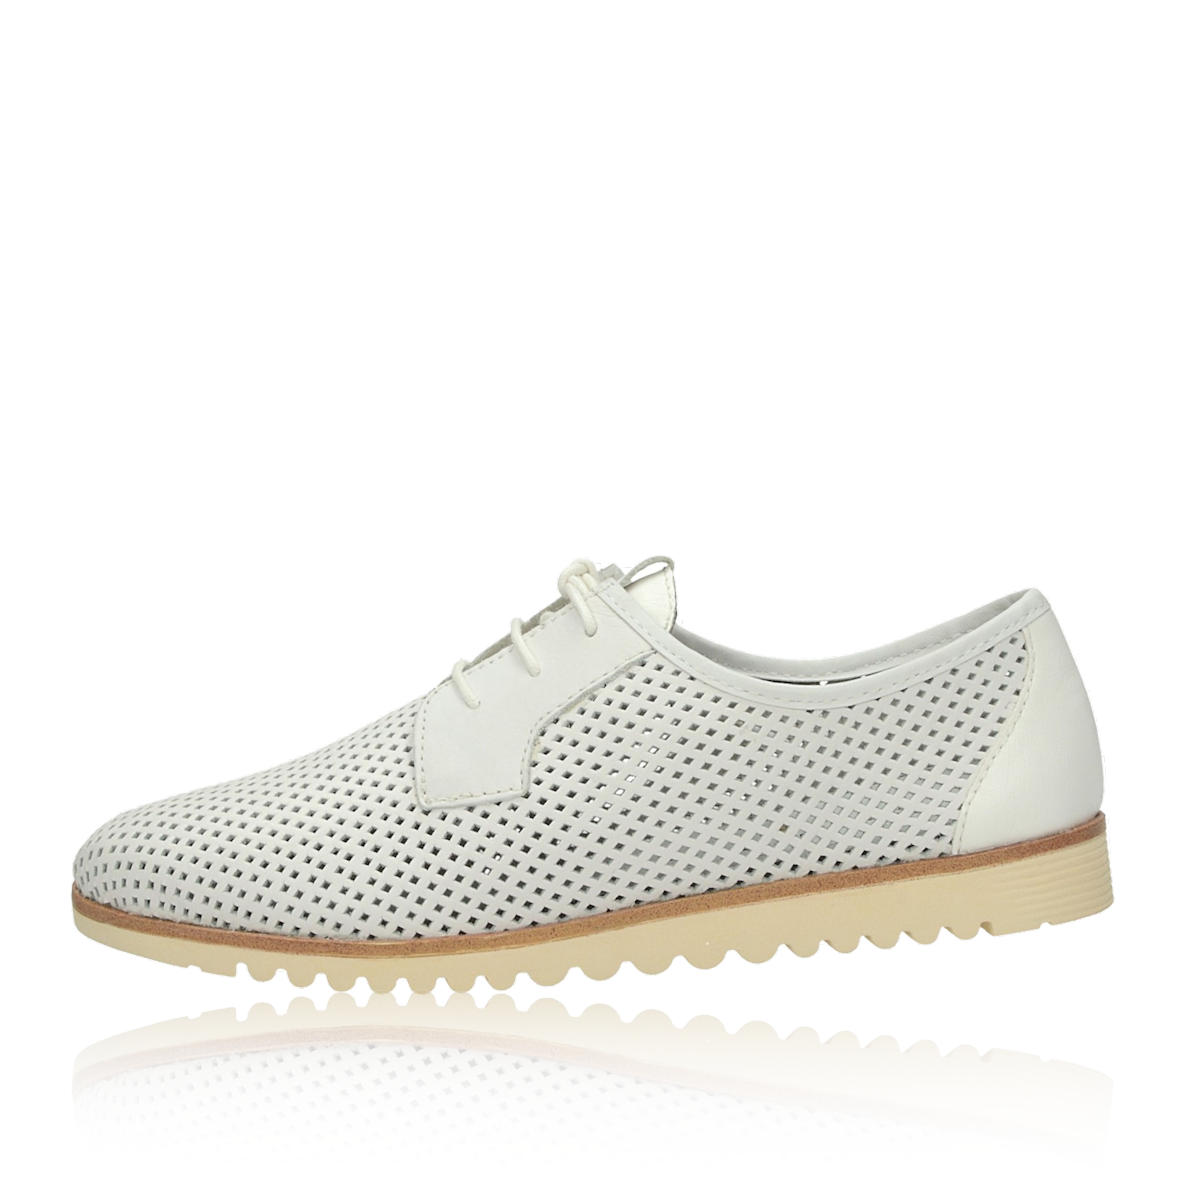 Tamaris perforated leather low shoes - white | Robel.shoes